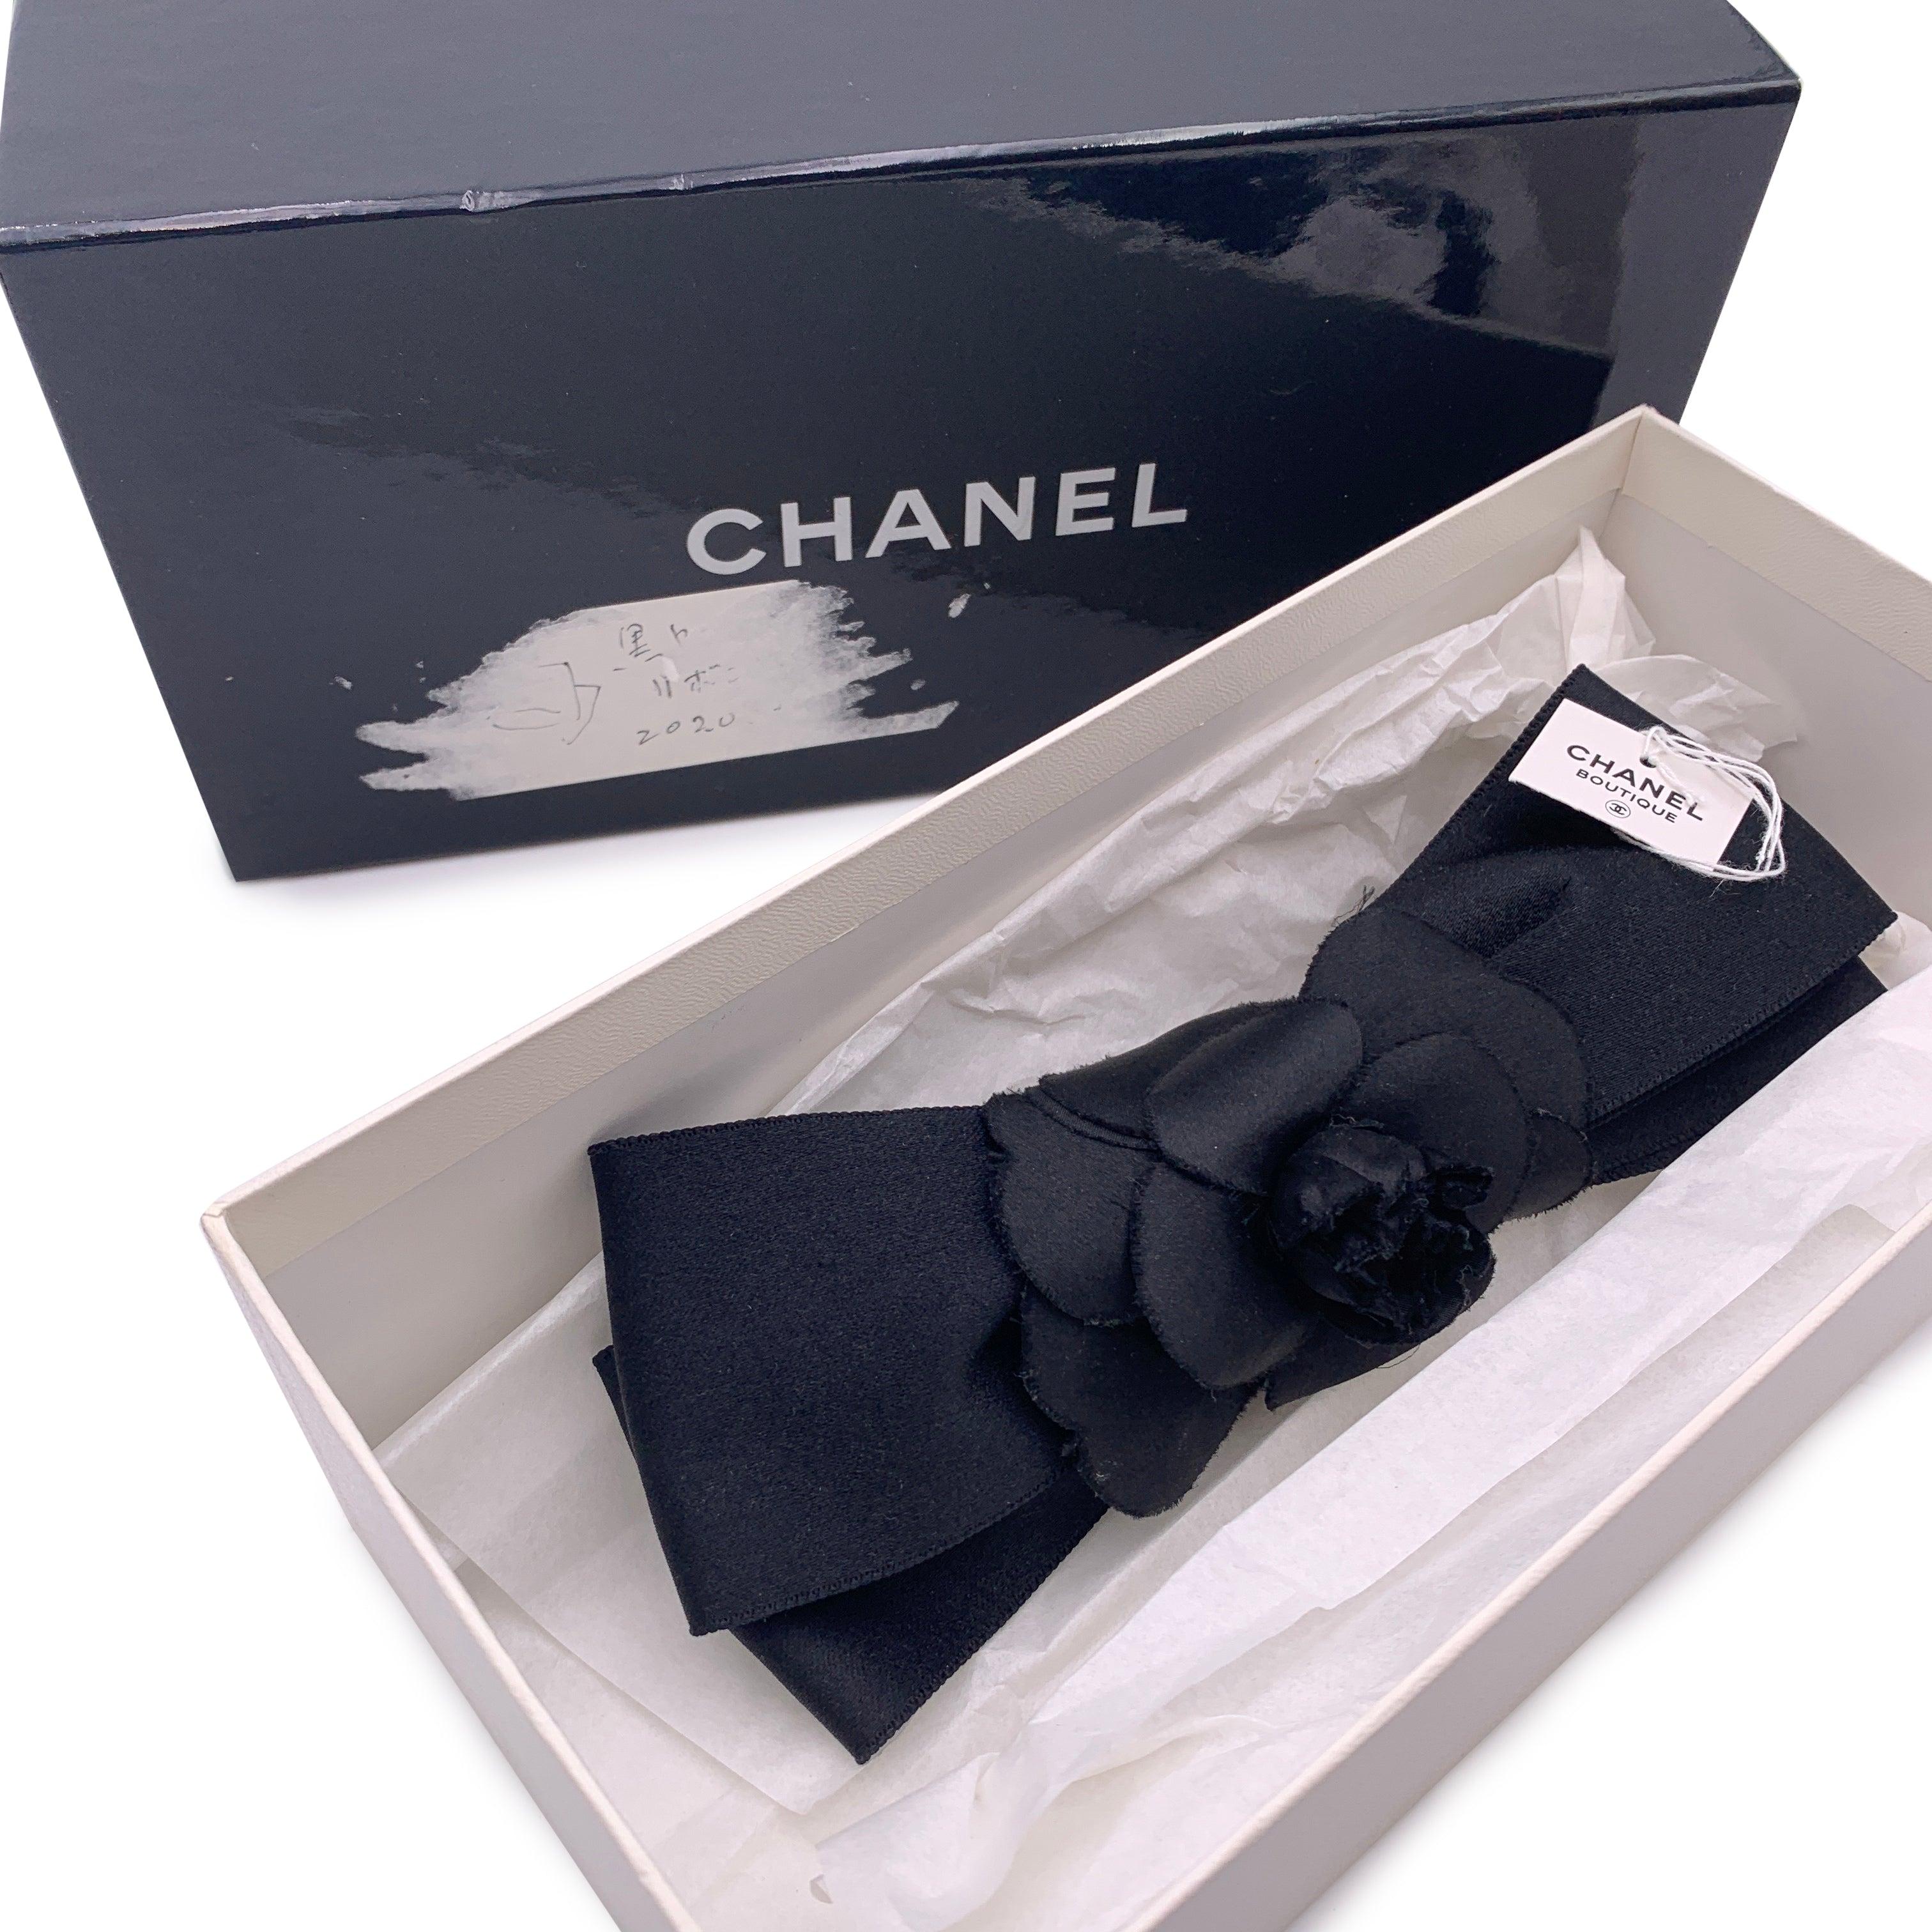 Lovely vintage Chanel barrette hair clip. Black satin Camellia flower with black satin bow. 'Made in France' engraved on the back of the clip. 'Chanel CC Made in France' oval tab on the back. Width: 7.5 inches - 19 cm Details MATERIAL: Cloth COLOR: